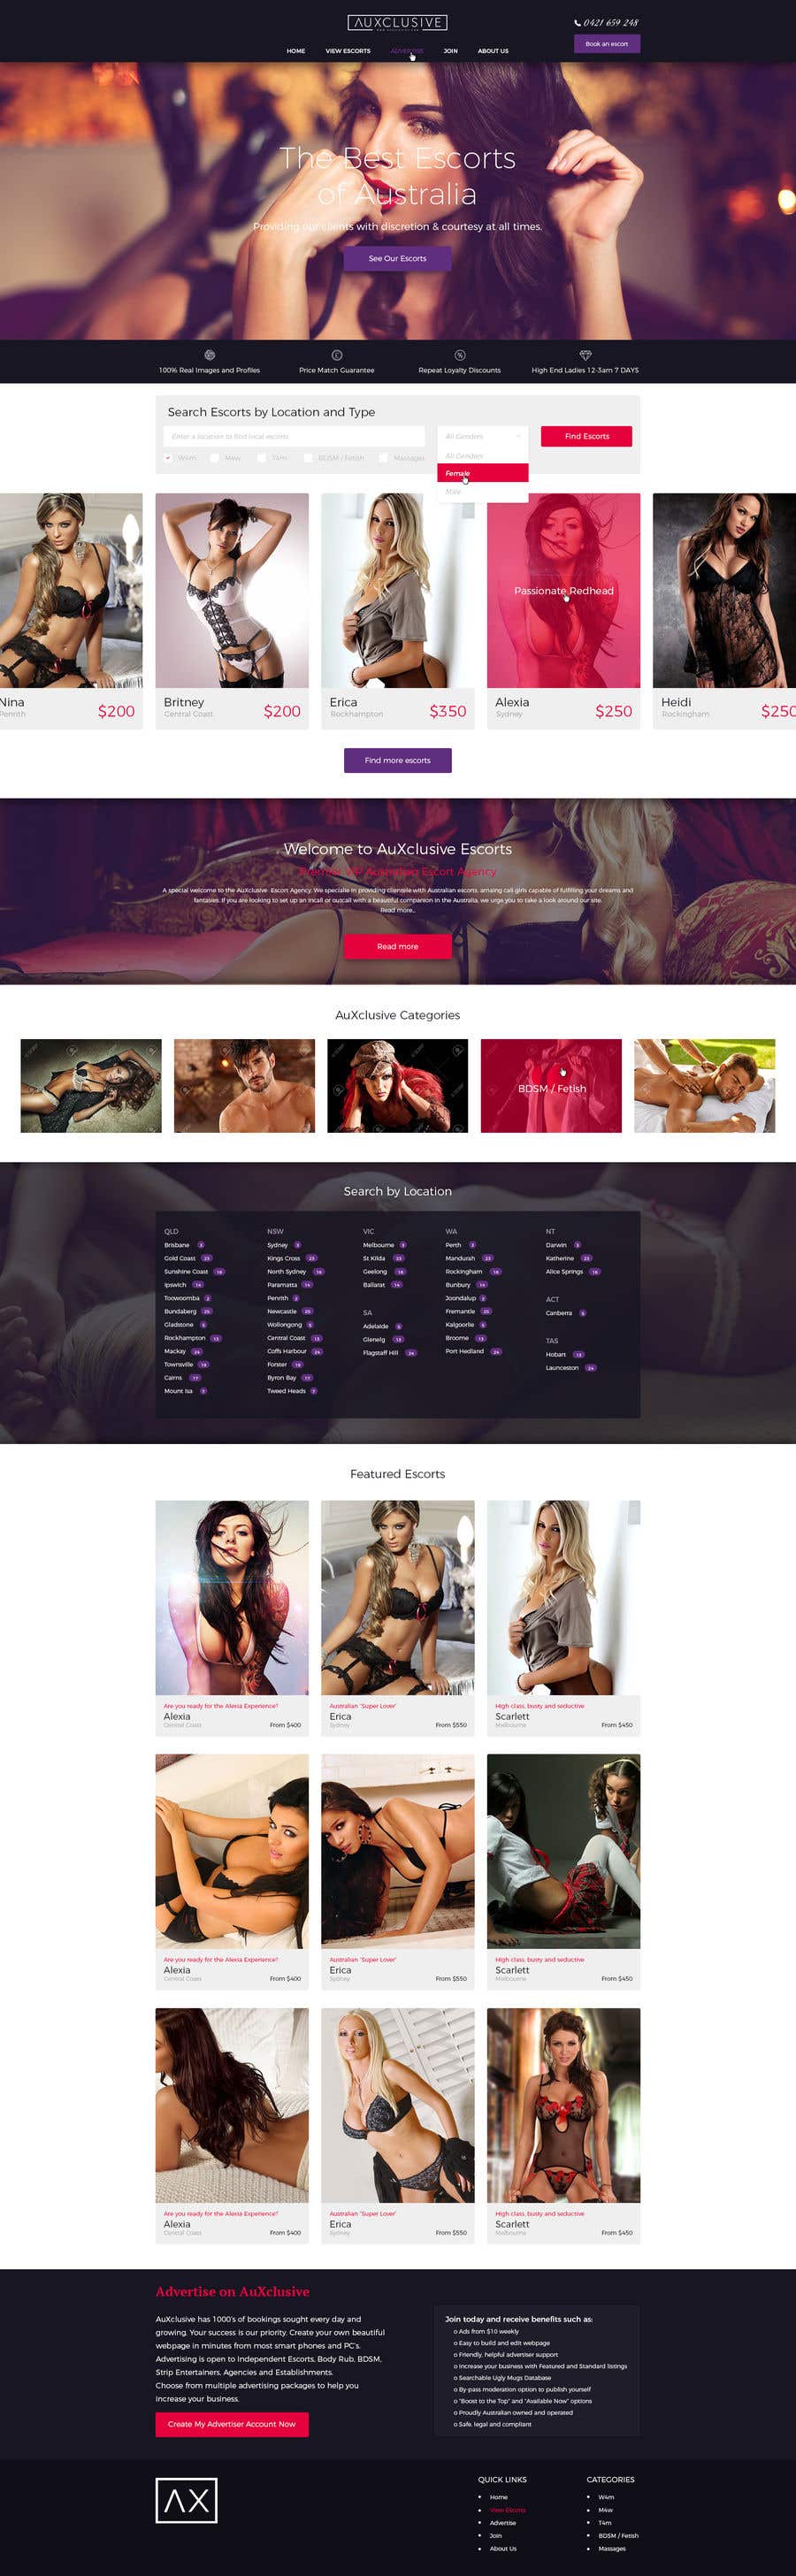 Contest Entry #5 for                                                 Design a Website home page for a dating / escorts website
                                            